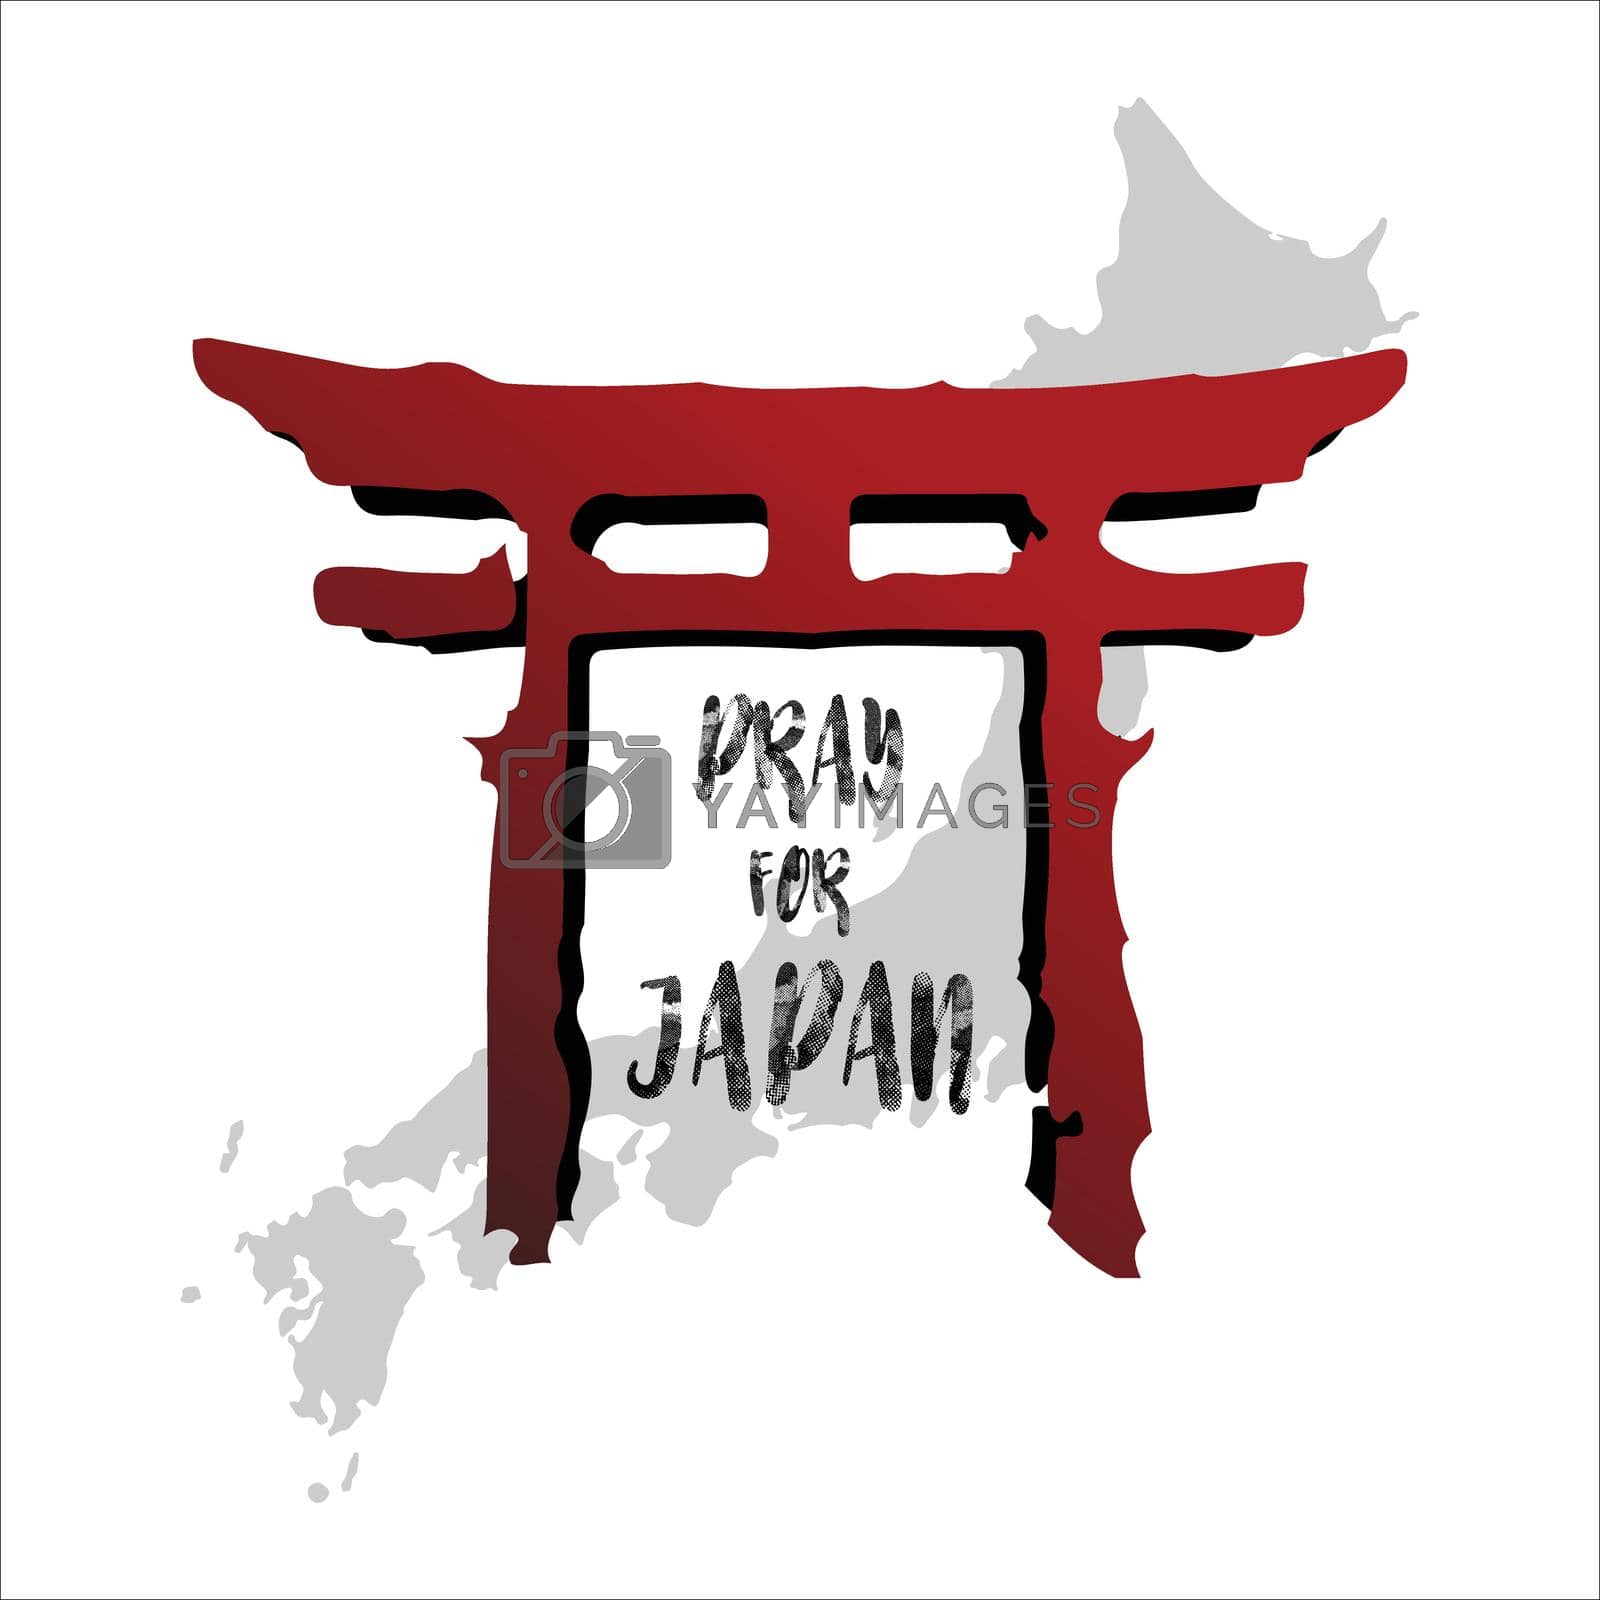 Royalty free image of Pray for Japan. Abstract background concept. Red spot Isolated white background with Japanese map. by MiniStocker